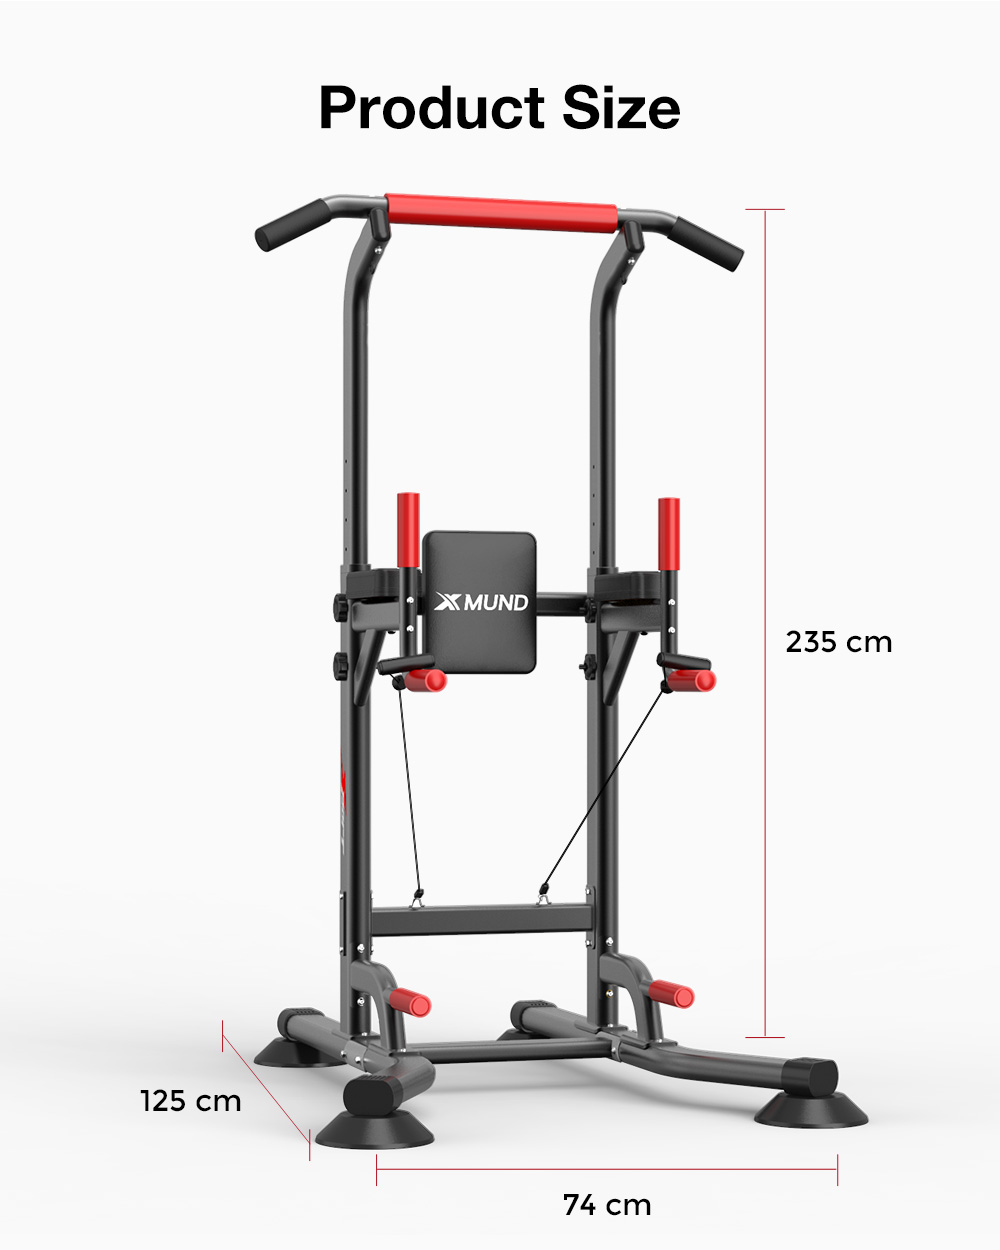 [US Stock] XMUND XD-PT1 Multifunctional Pull Up Dip Station Power Tower Traction Horizontal Bar Strength Training Fitness Exercise Home Gym